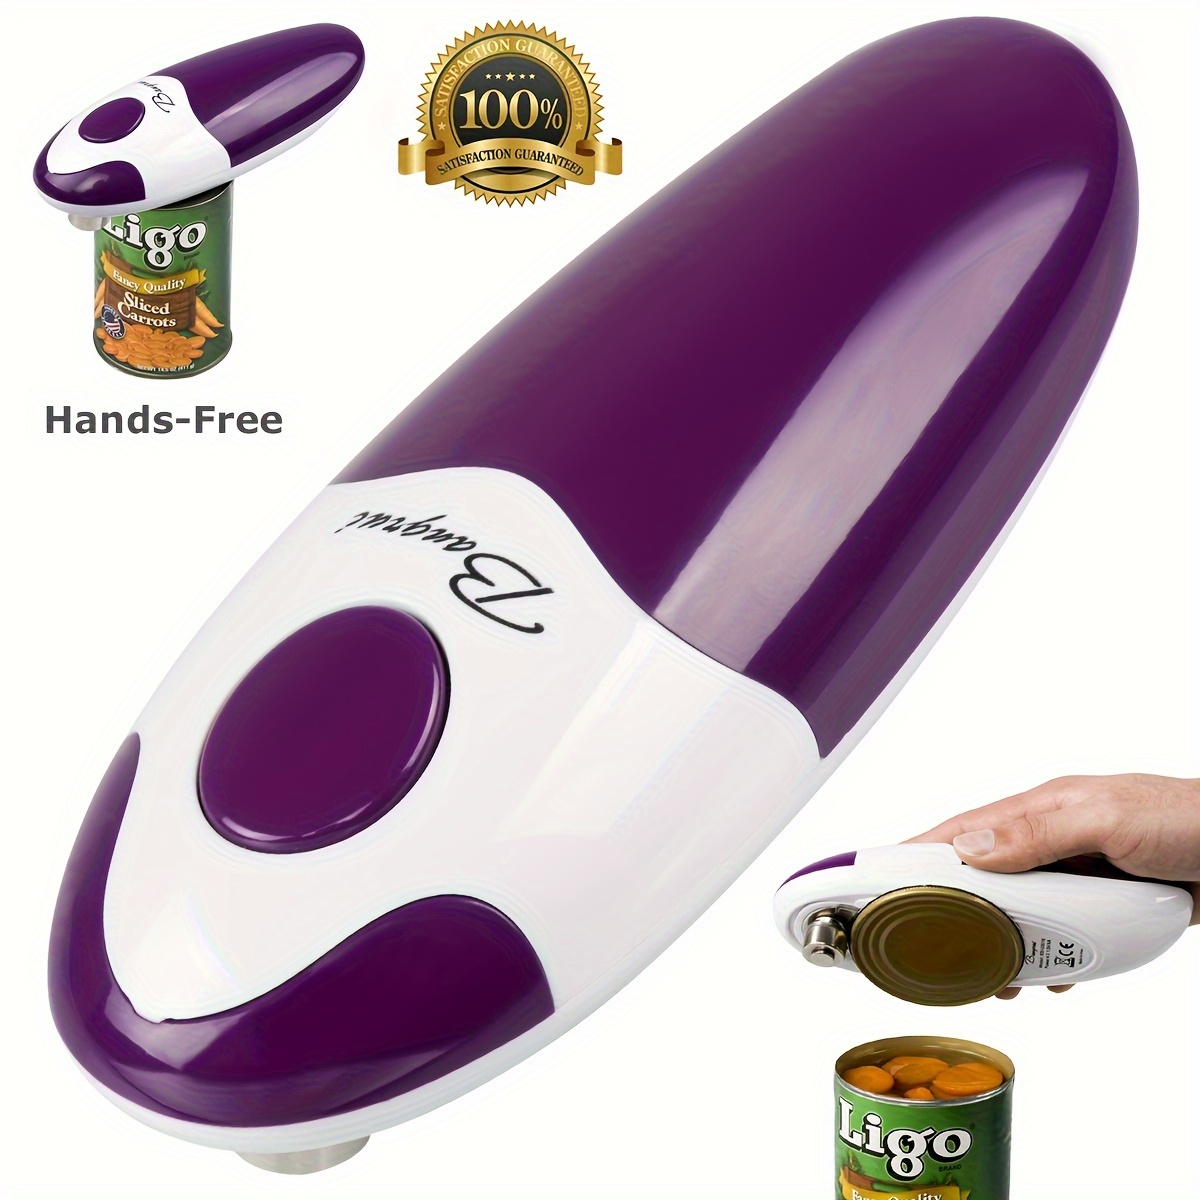 Electric Can Opener, No Sharp Edge Can Opener Electric, Hands-Free Electric Can Opener for Kitchen, Automatic Can Opener for Any size, Kitchen